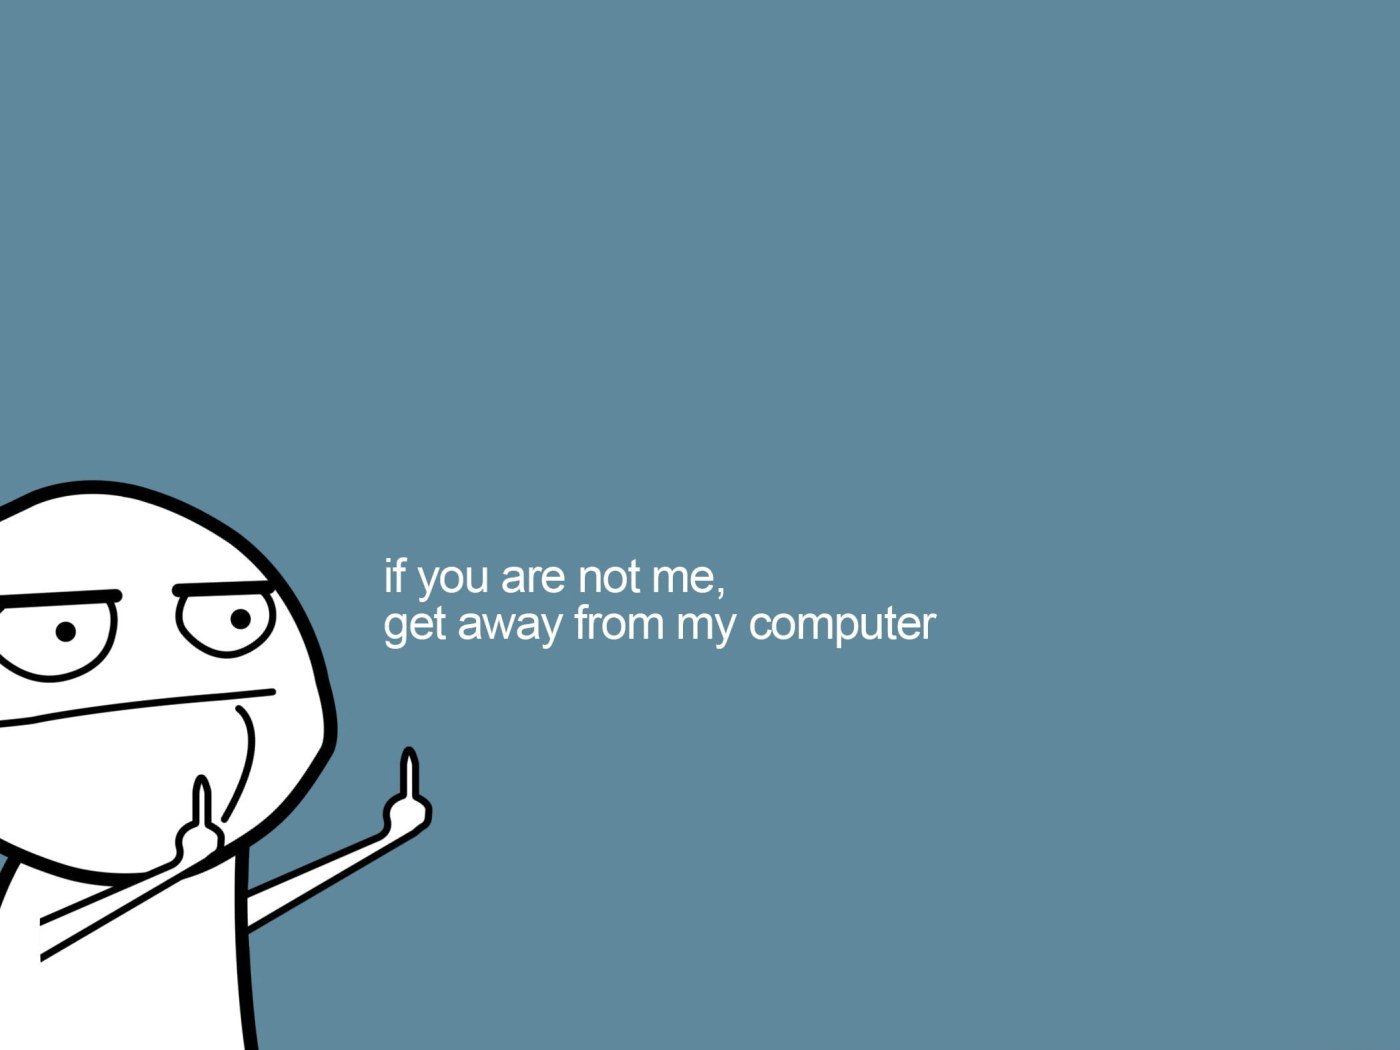 Get Away From My Computer, if you are not me, get away from my computer meme wallpaper • Wallpaper For You HD Wallpaper For Desktop & Mobile